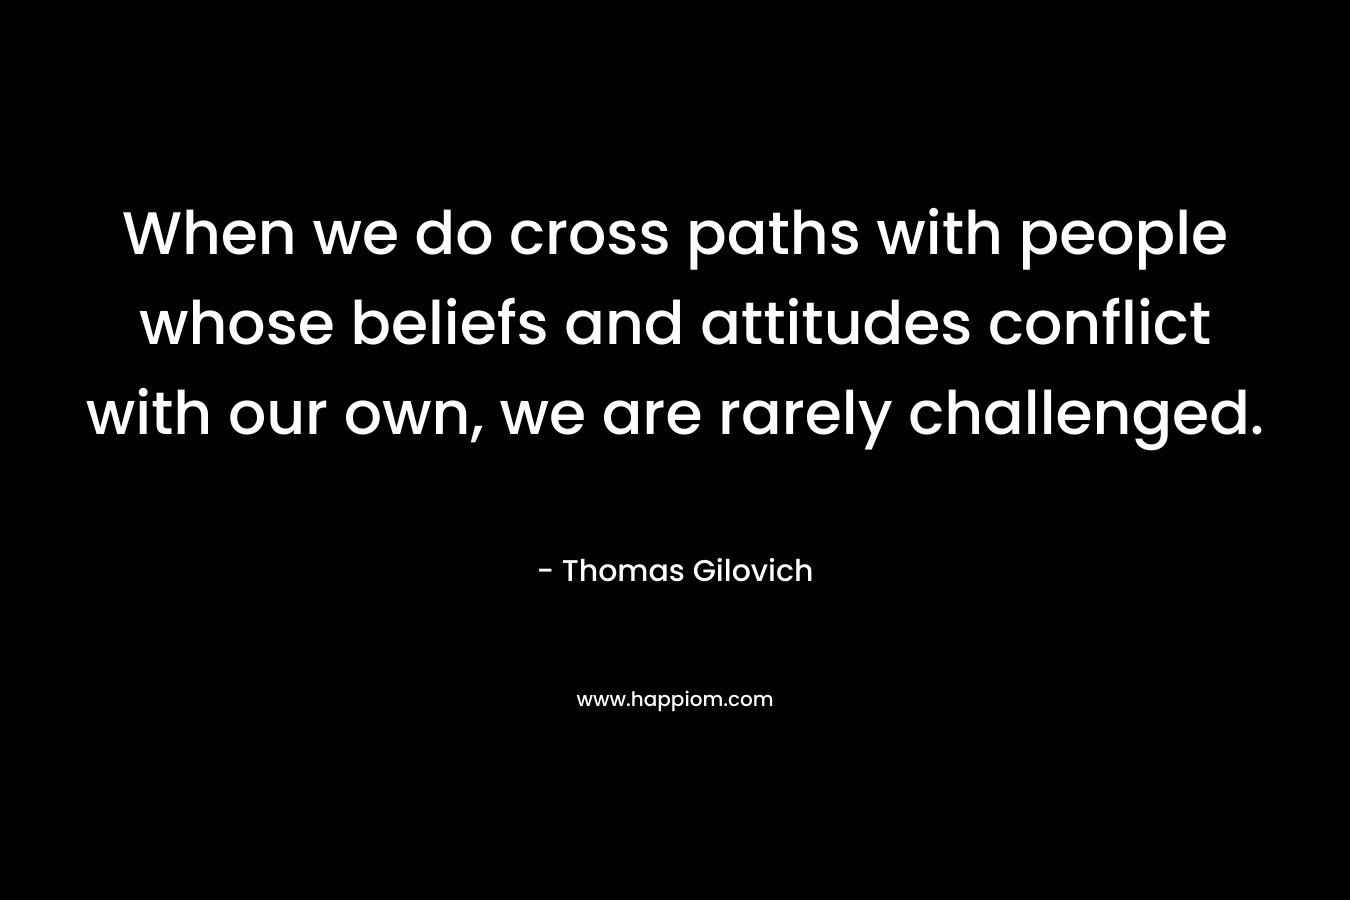 When we do cross paths with people whose beliefs and attitudes conflict with our own, we are rarely challenged. – Thomas Gilovich